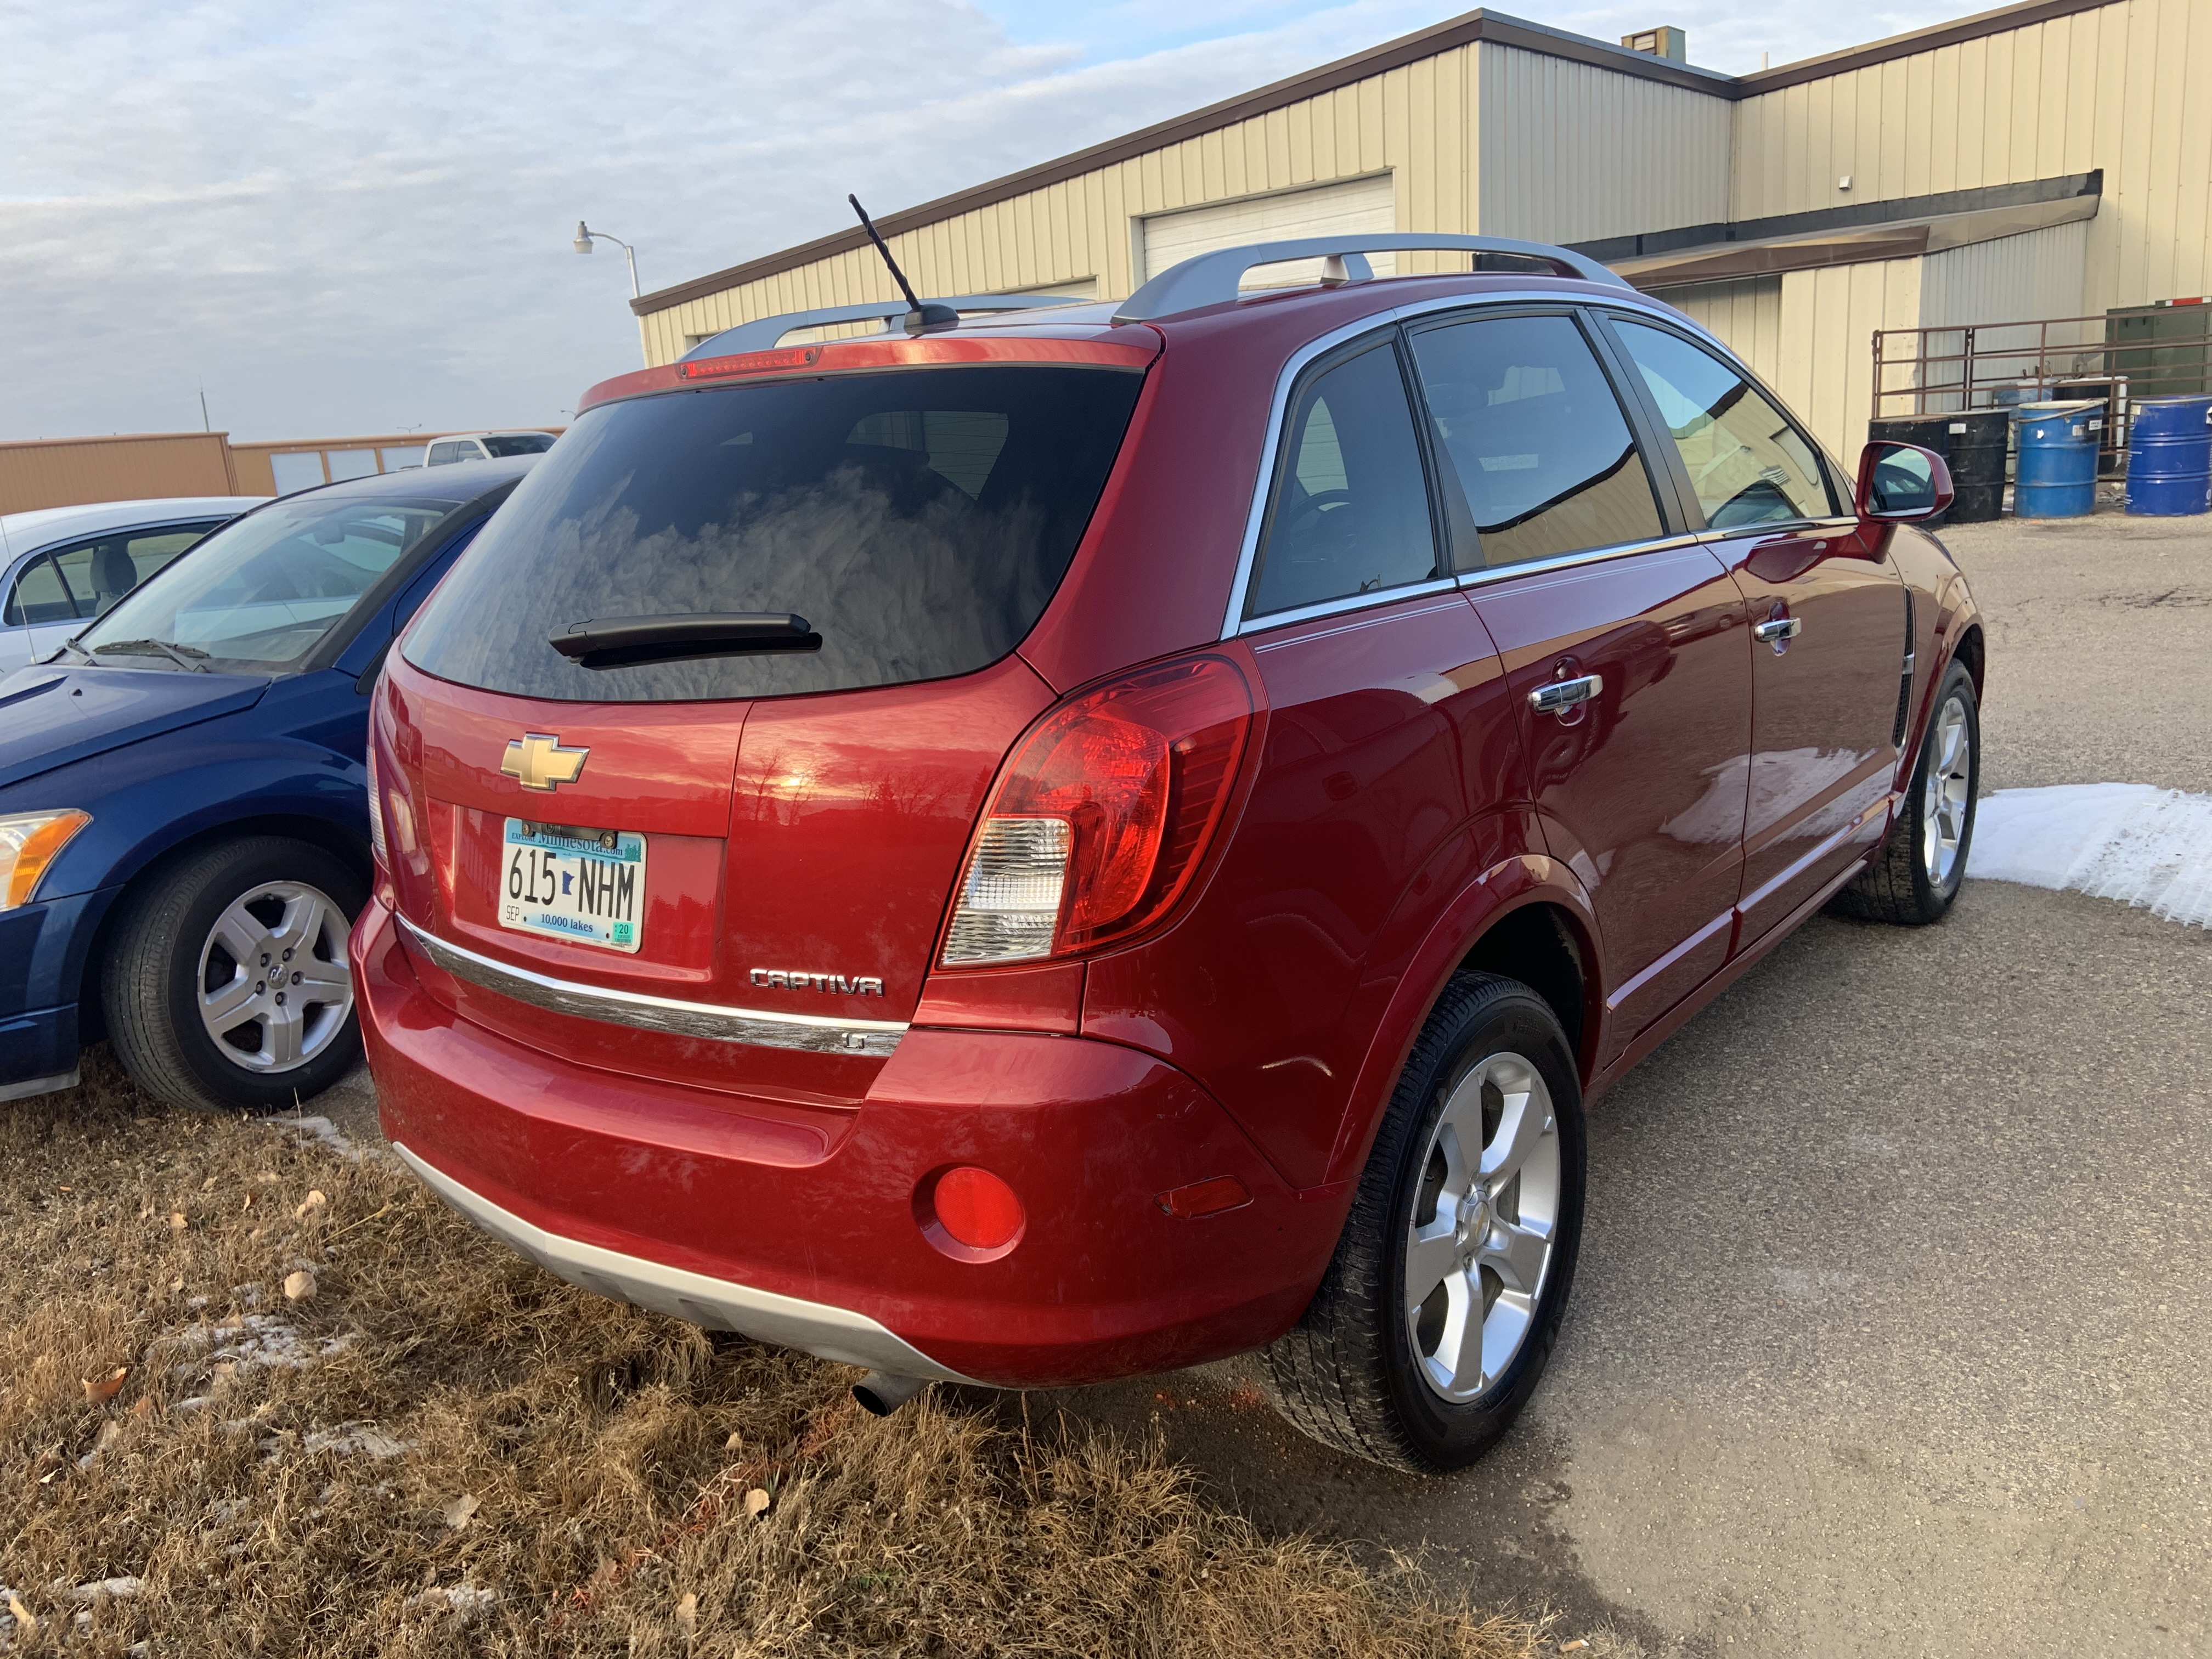 PreOwned 2014 Chevrolet Captiva LT Crossover in Thief